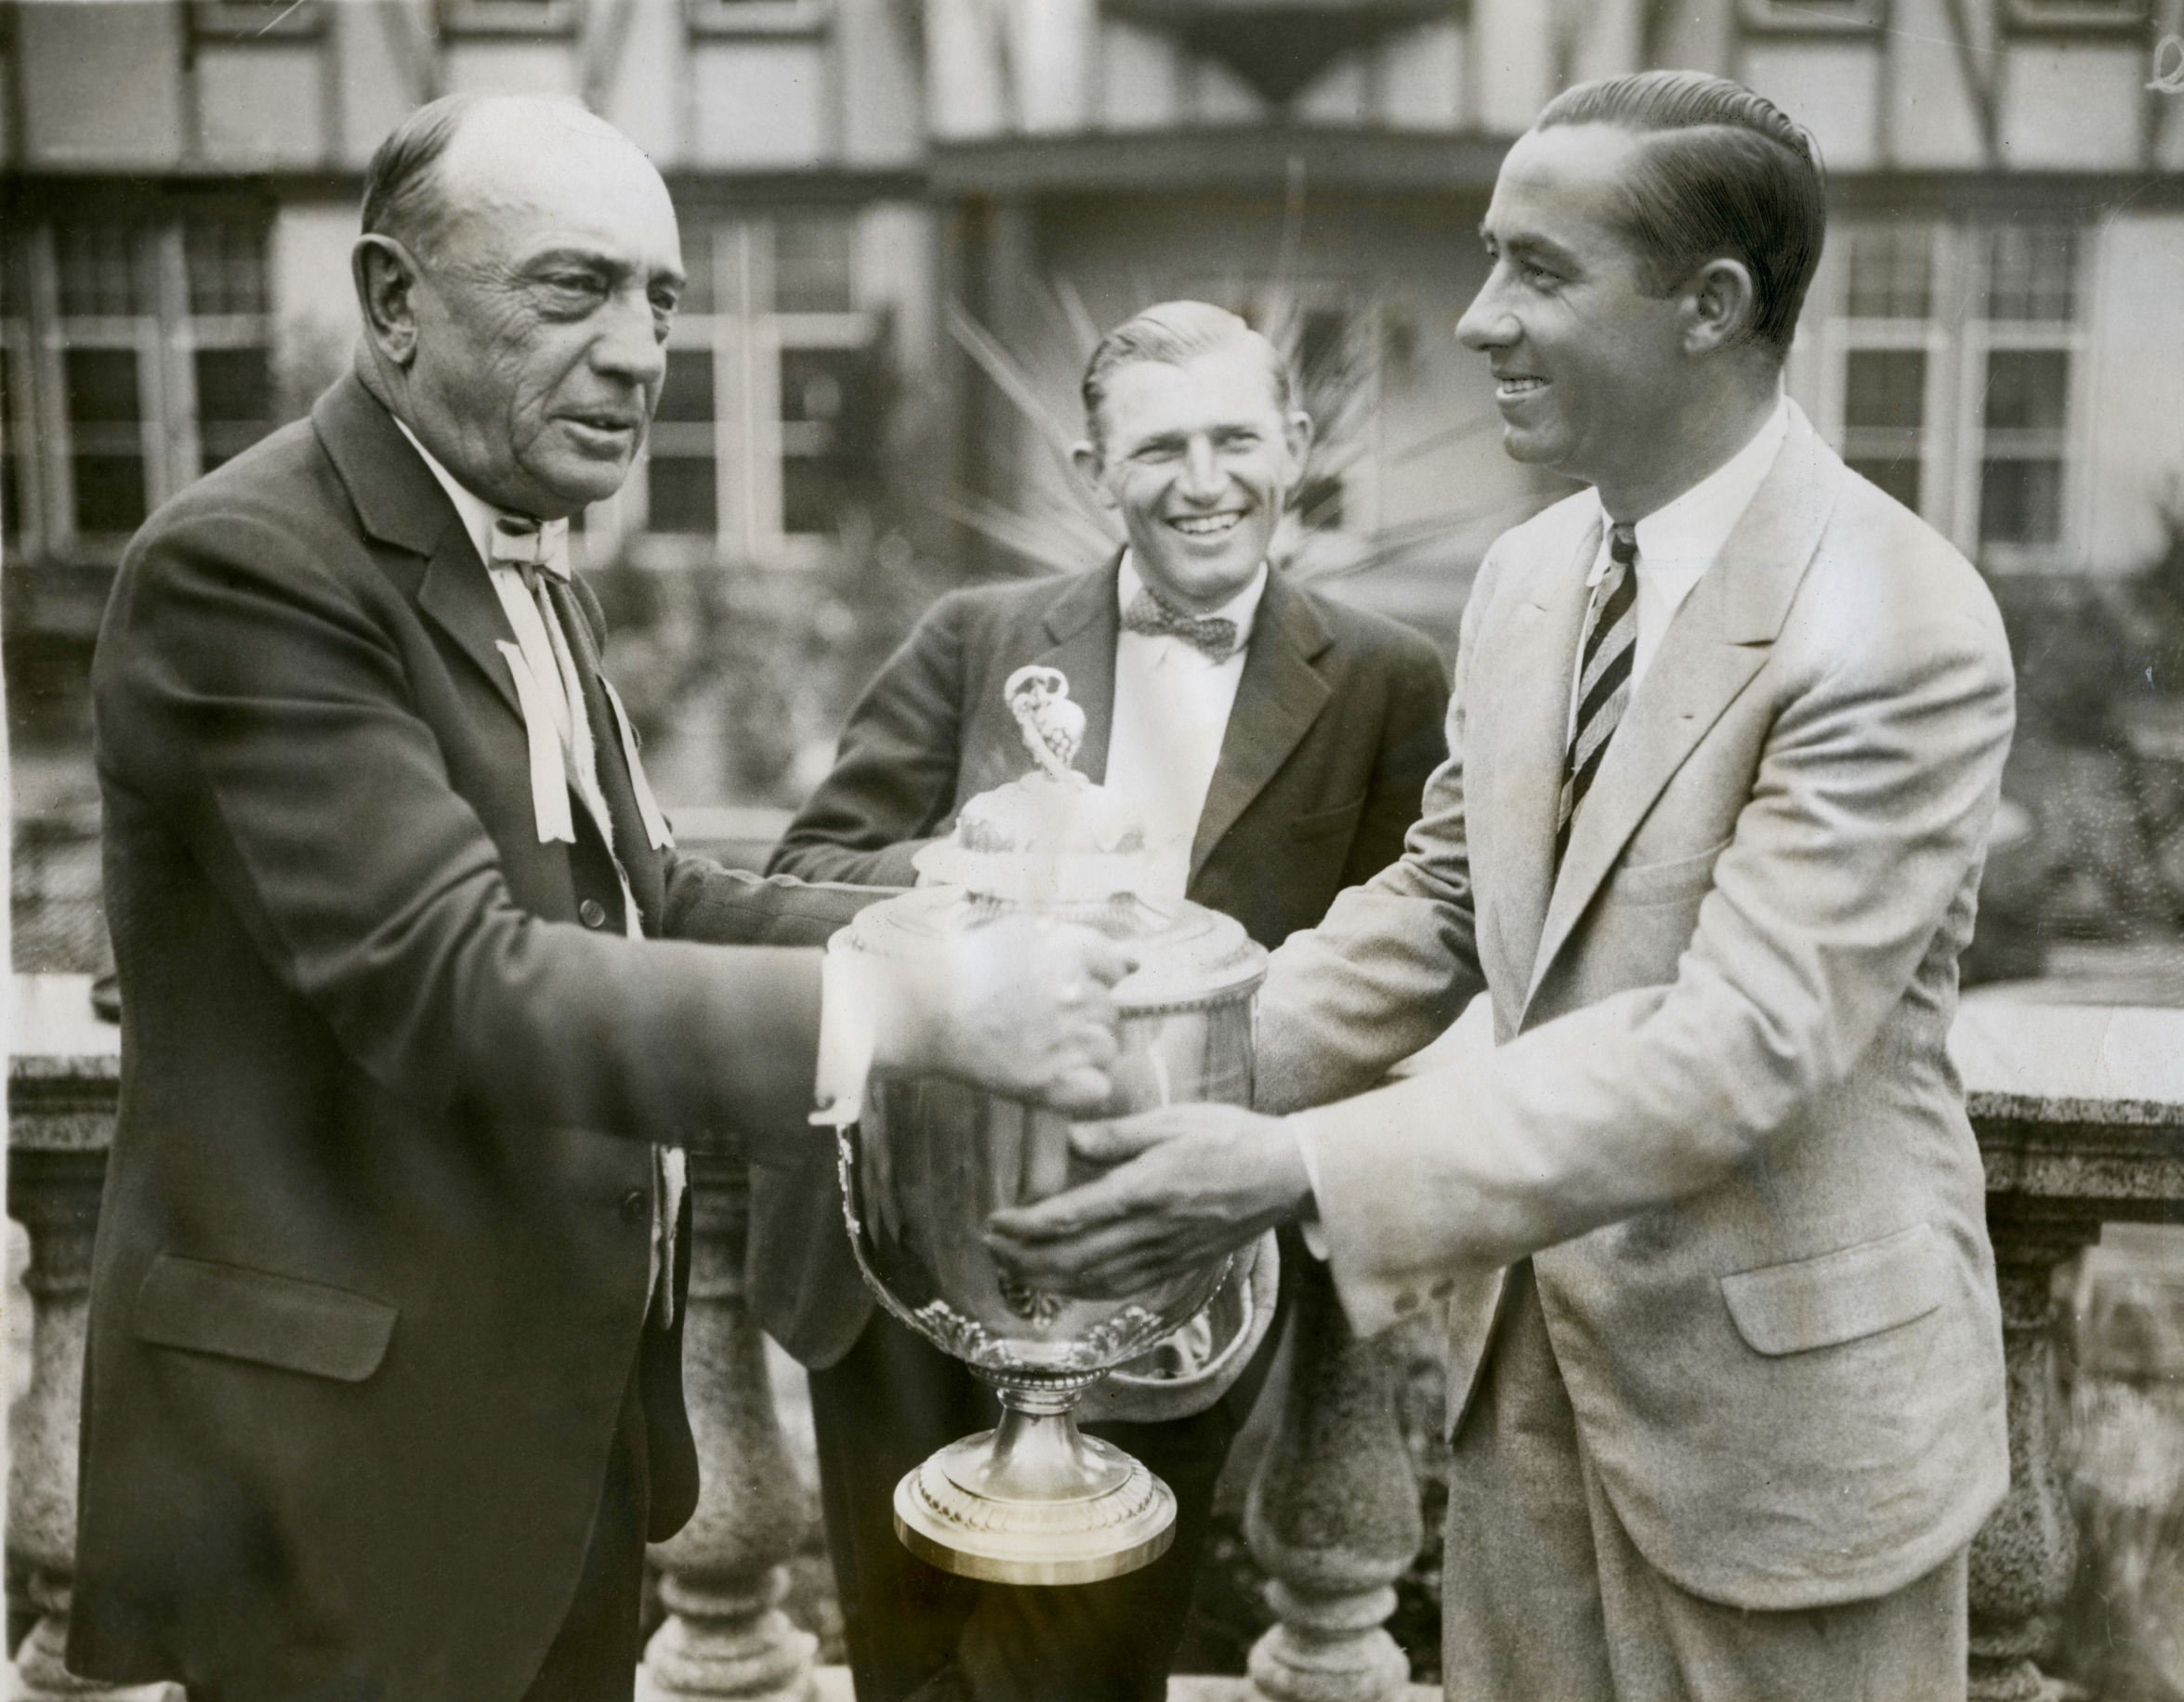 Walter Hagen presented the Wanamaker Trophy, September 26, 1925 by Olympia Fields C.C. President Charles Smalley, with Runner-Up Bill Mehlhorn looking on. (Image by permission of Olympia Fields)